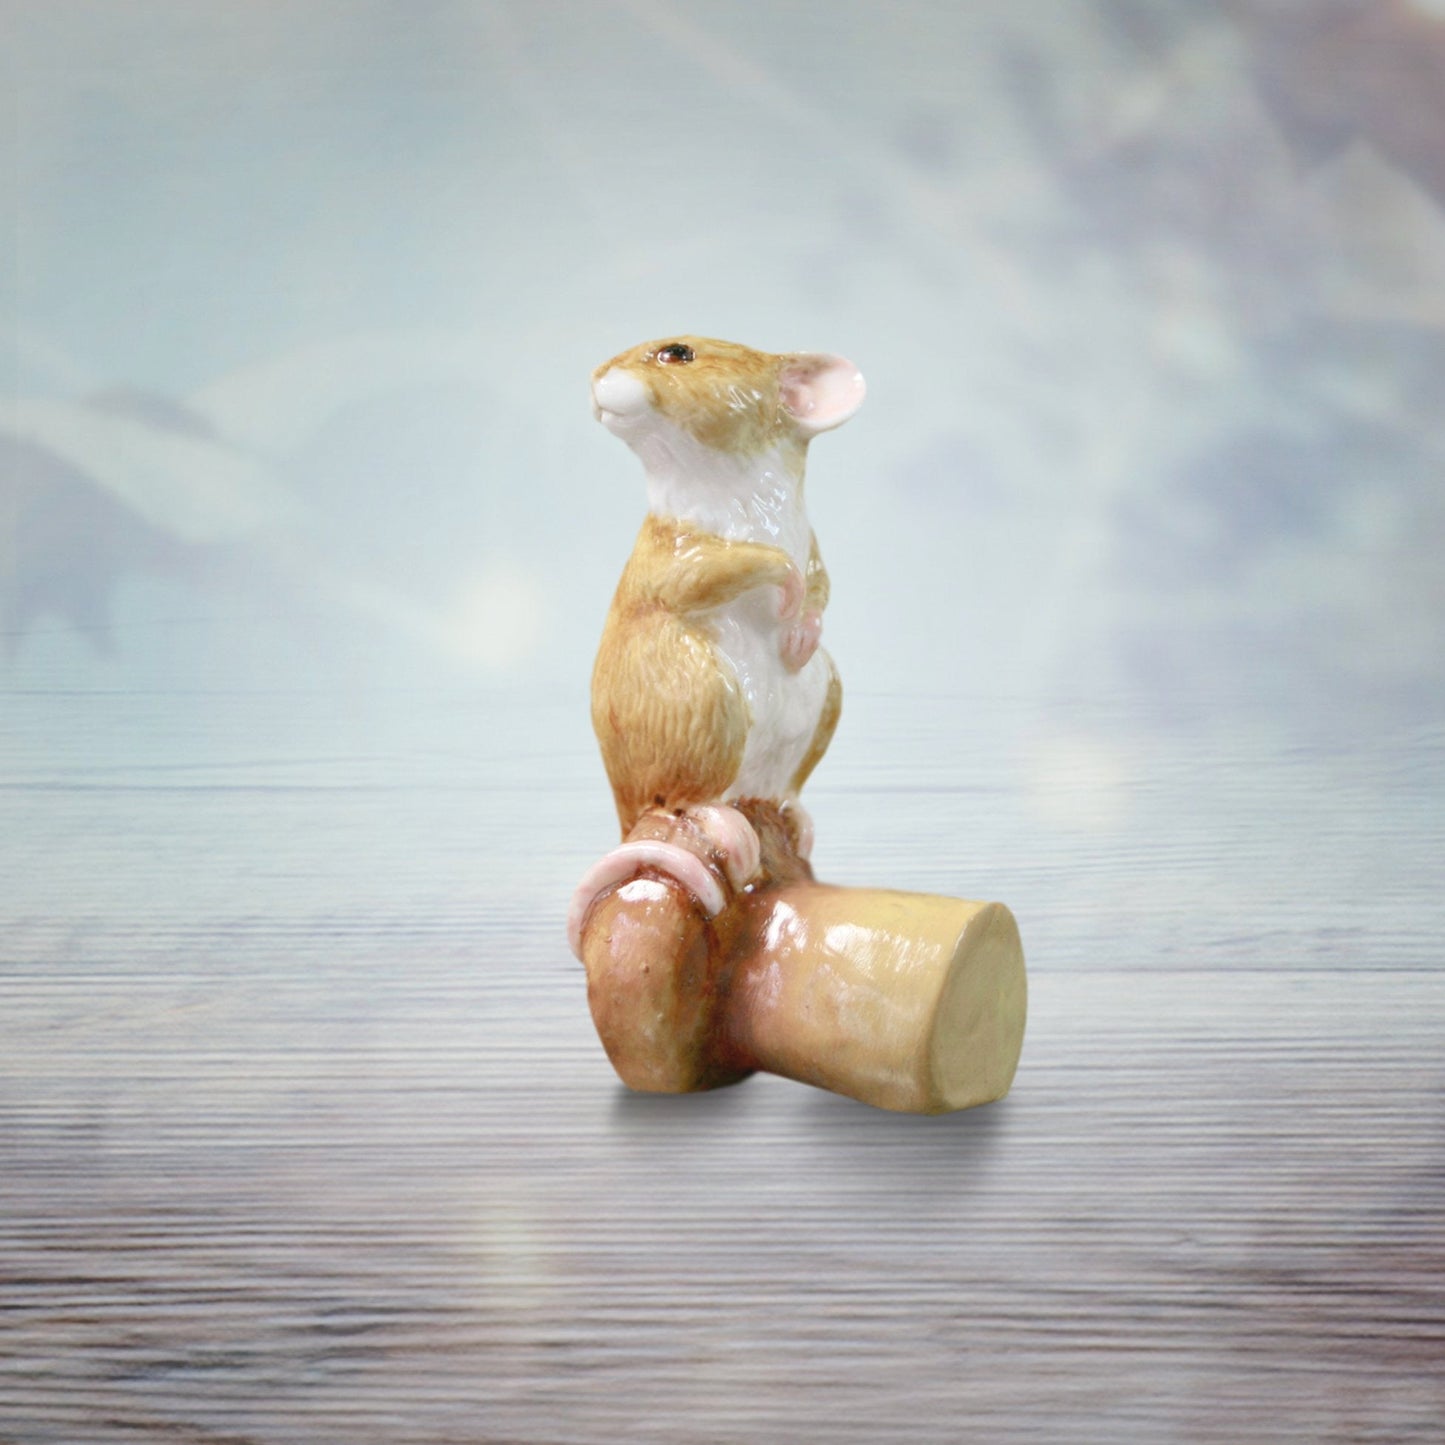 Richard Cooper The Cottage Studio Mouse on Champagne Cork by Keith Sherwin